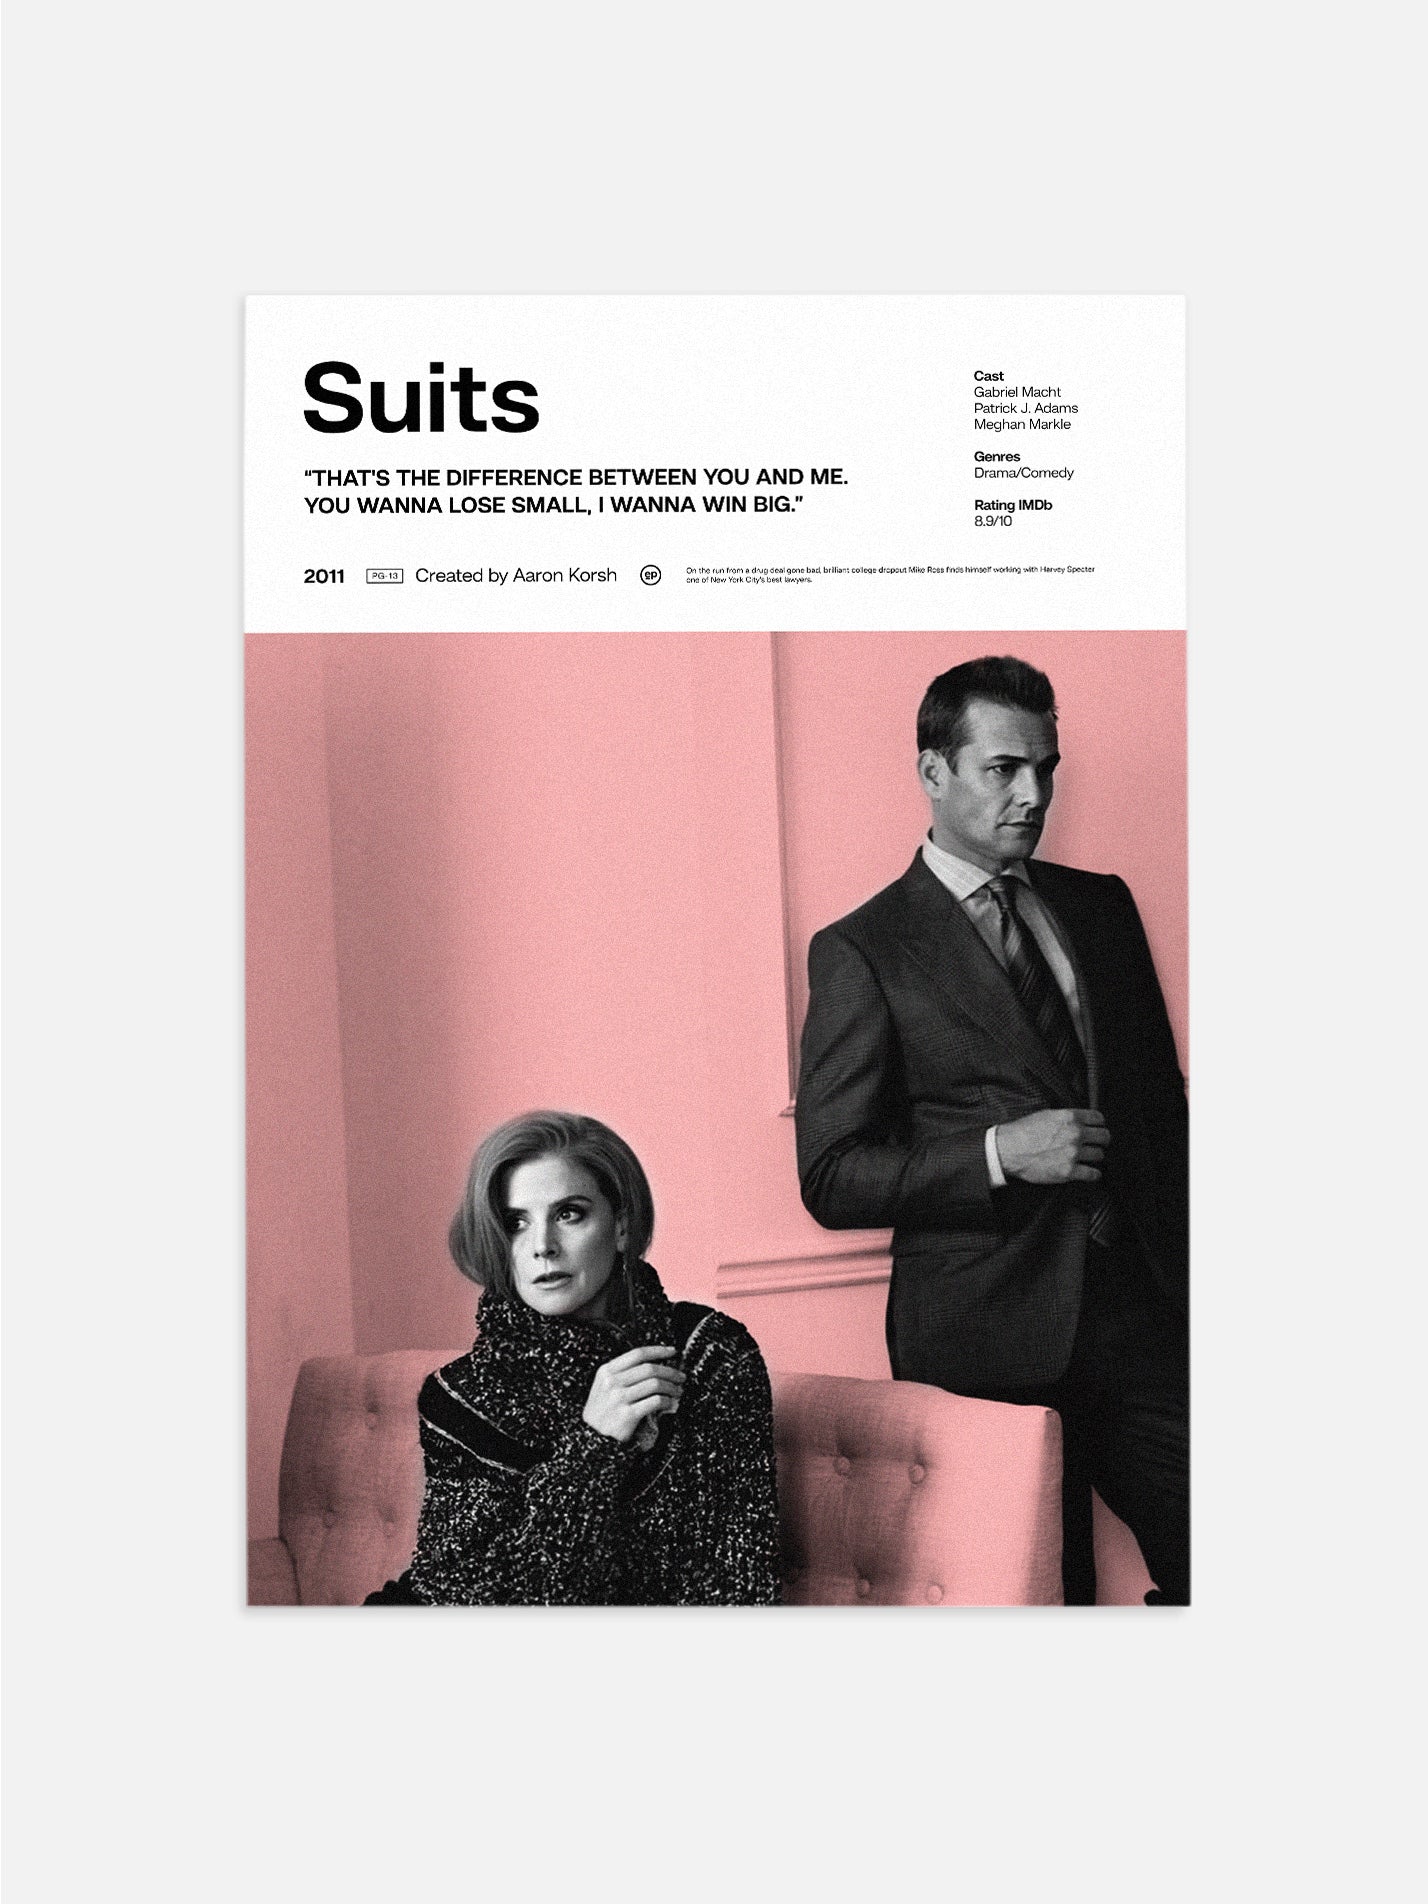 Suits Poster TV Movie Poster Art Film Print Gift su001 - Etsy